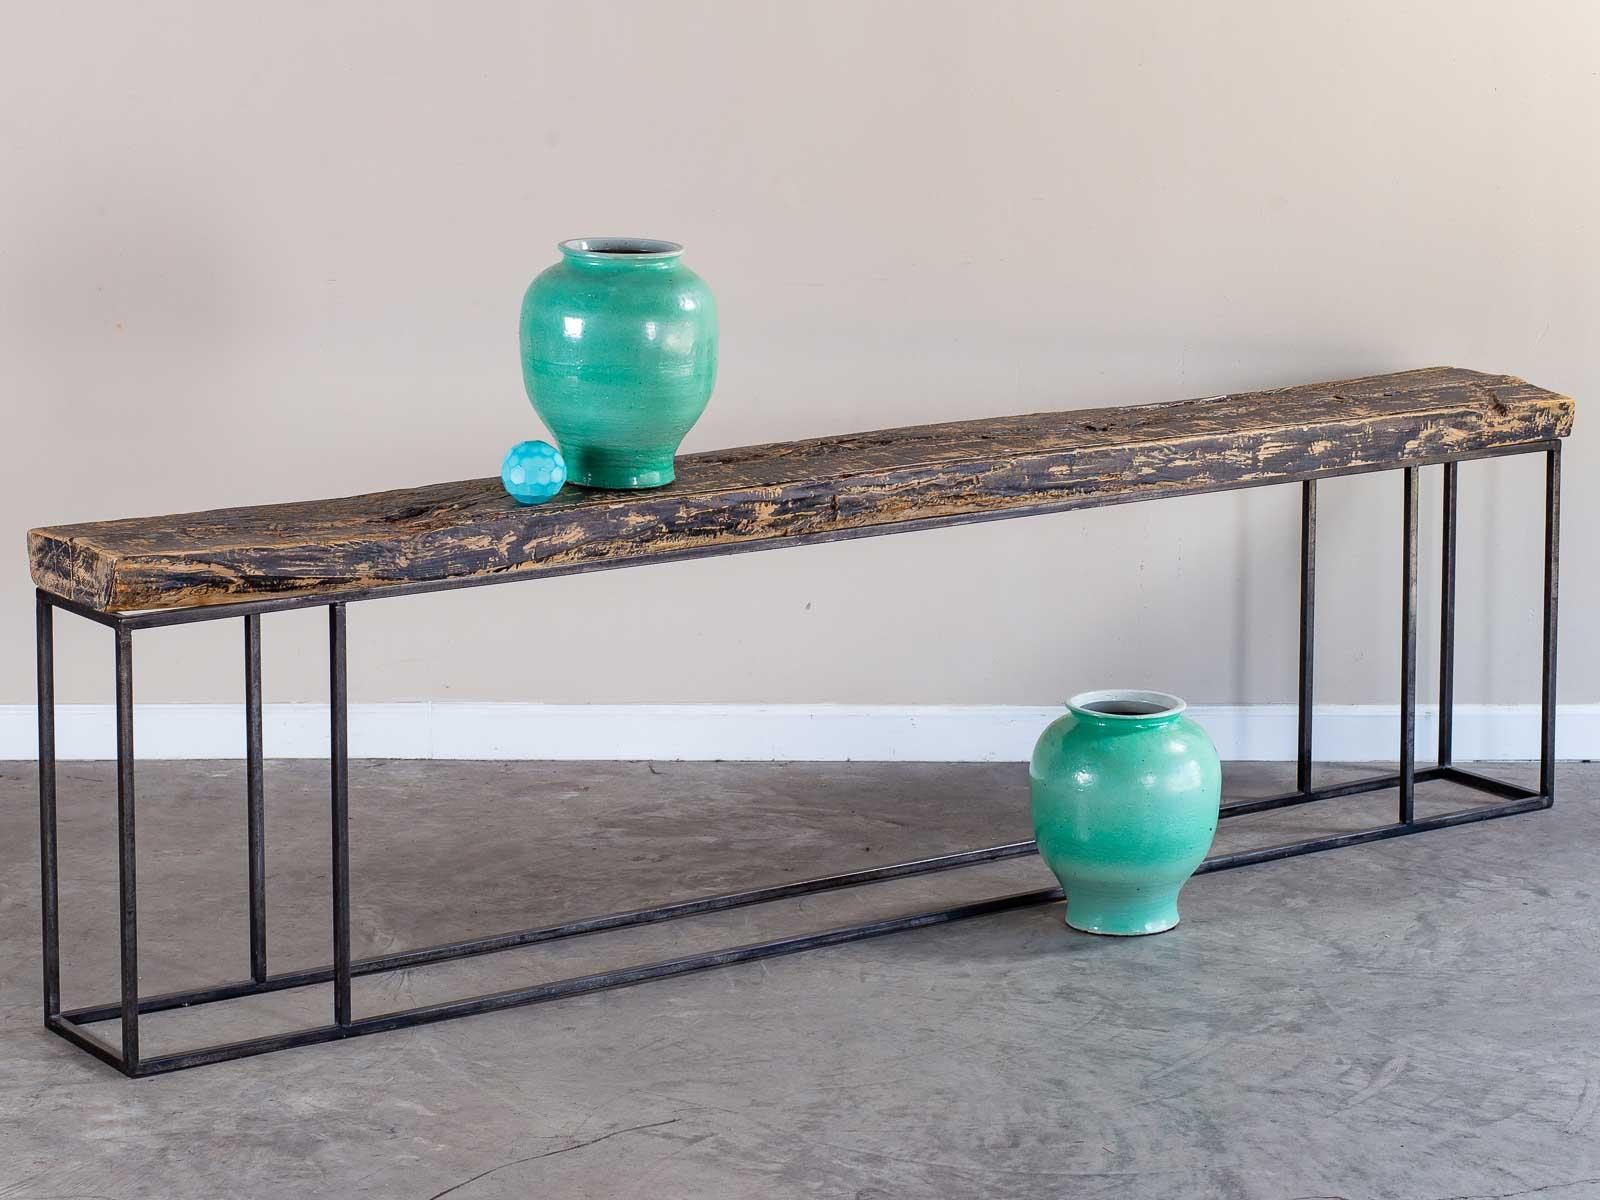 Hand-Crafted Antique Reclaimed Architectural Server Console Table, circa 1850 Organic Modern